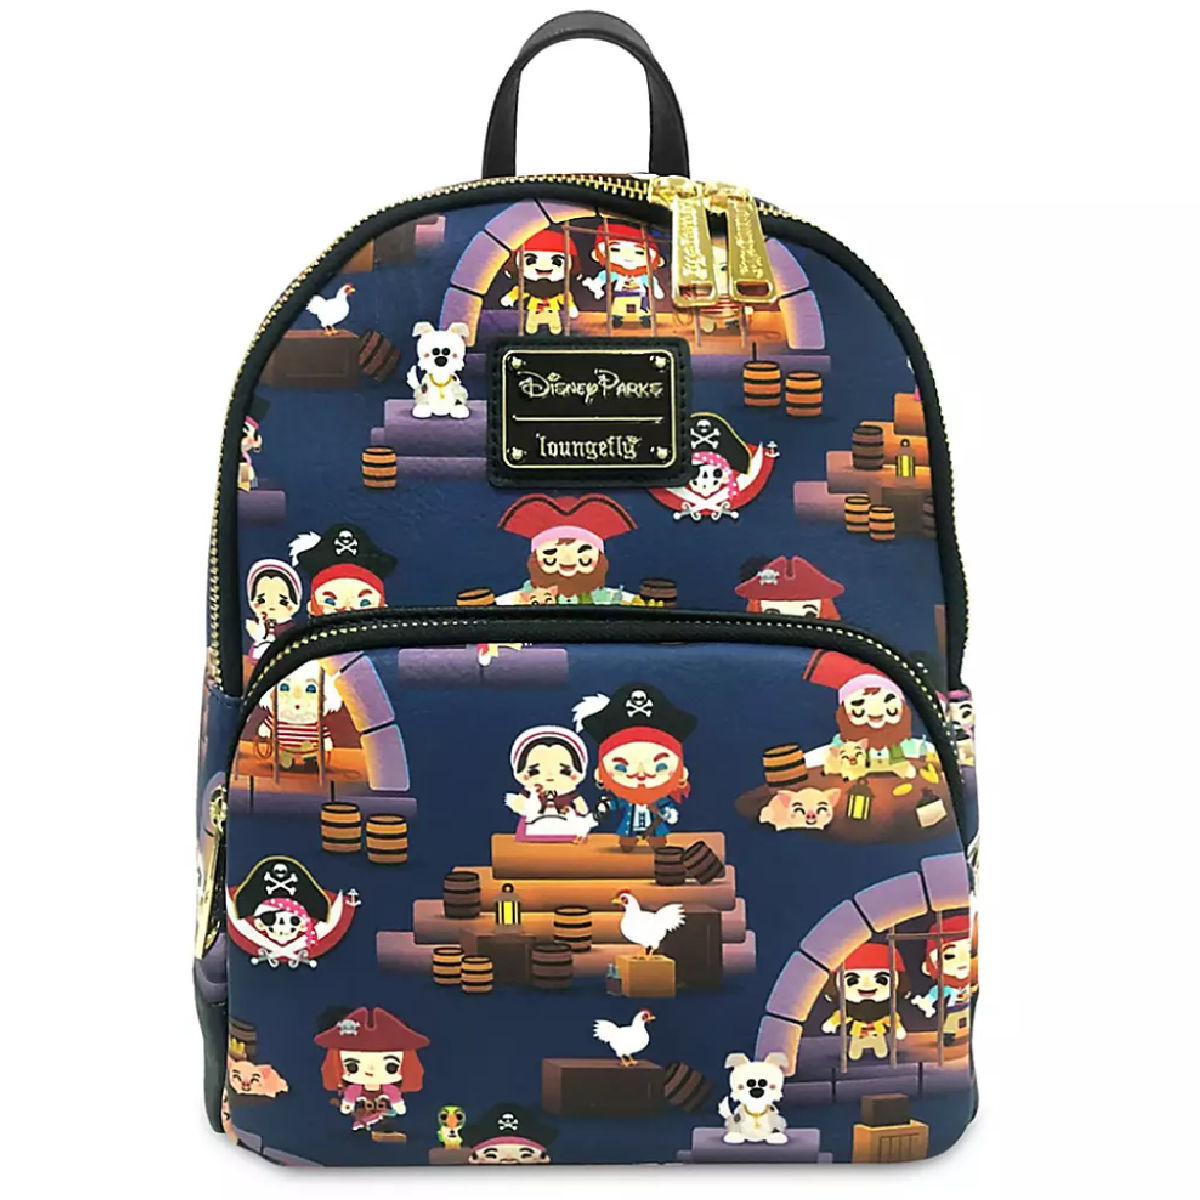 Loungefly Disney Pirates of the Caribbean Mini Backpack